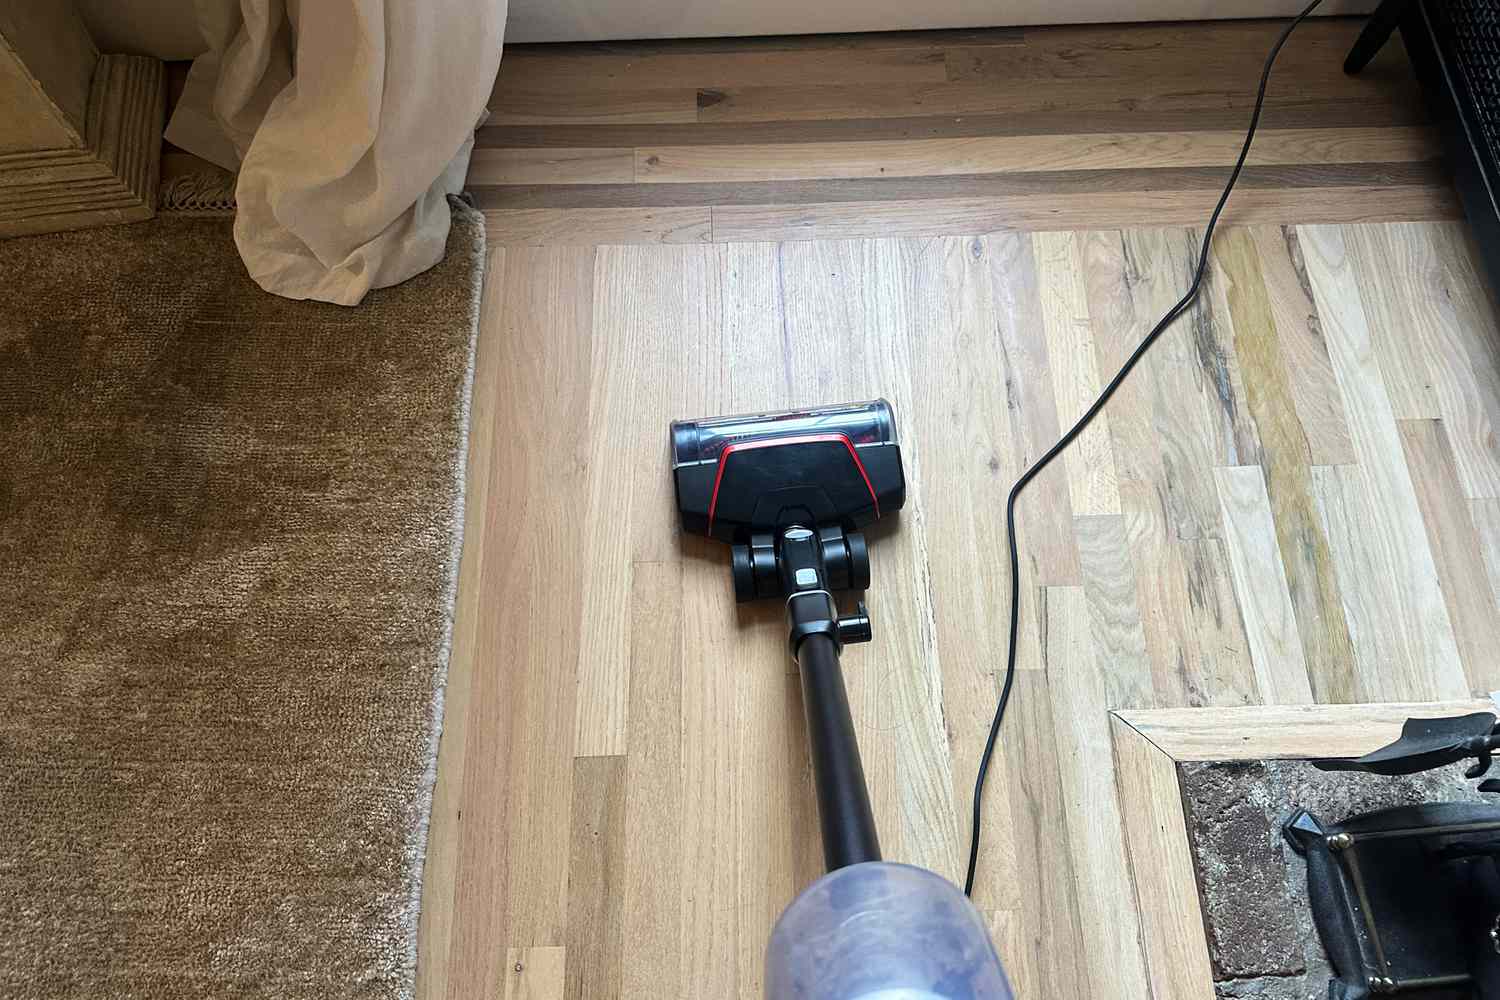 A person cleans a hardwood floor using the Bissell CleanView Pet Slim Corded Stick Vacuum